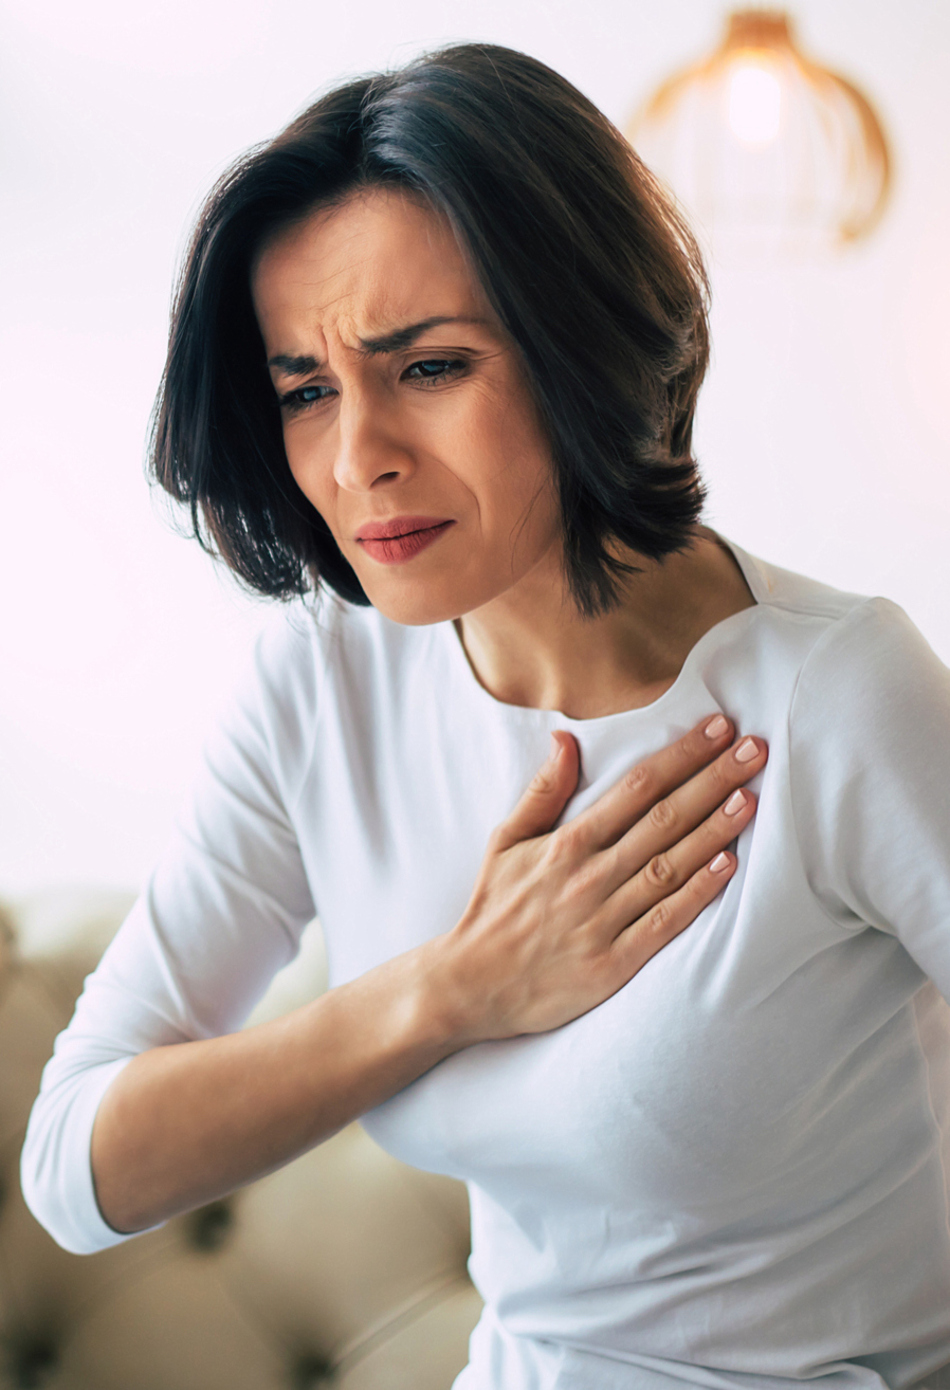 Why Women Experience Heart Attack Symptoms Differently Than Men